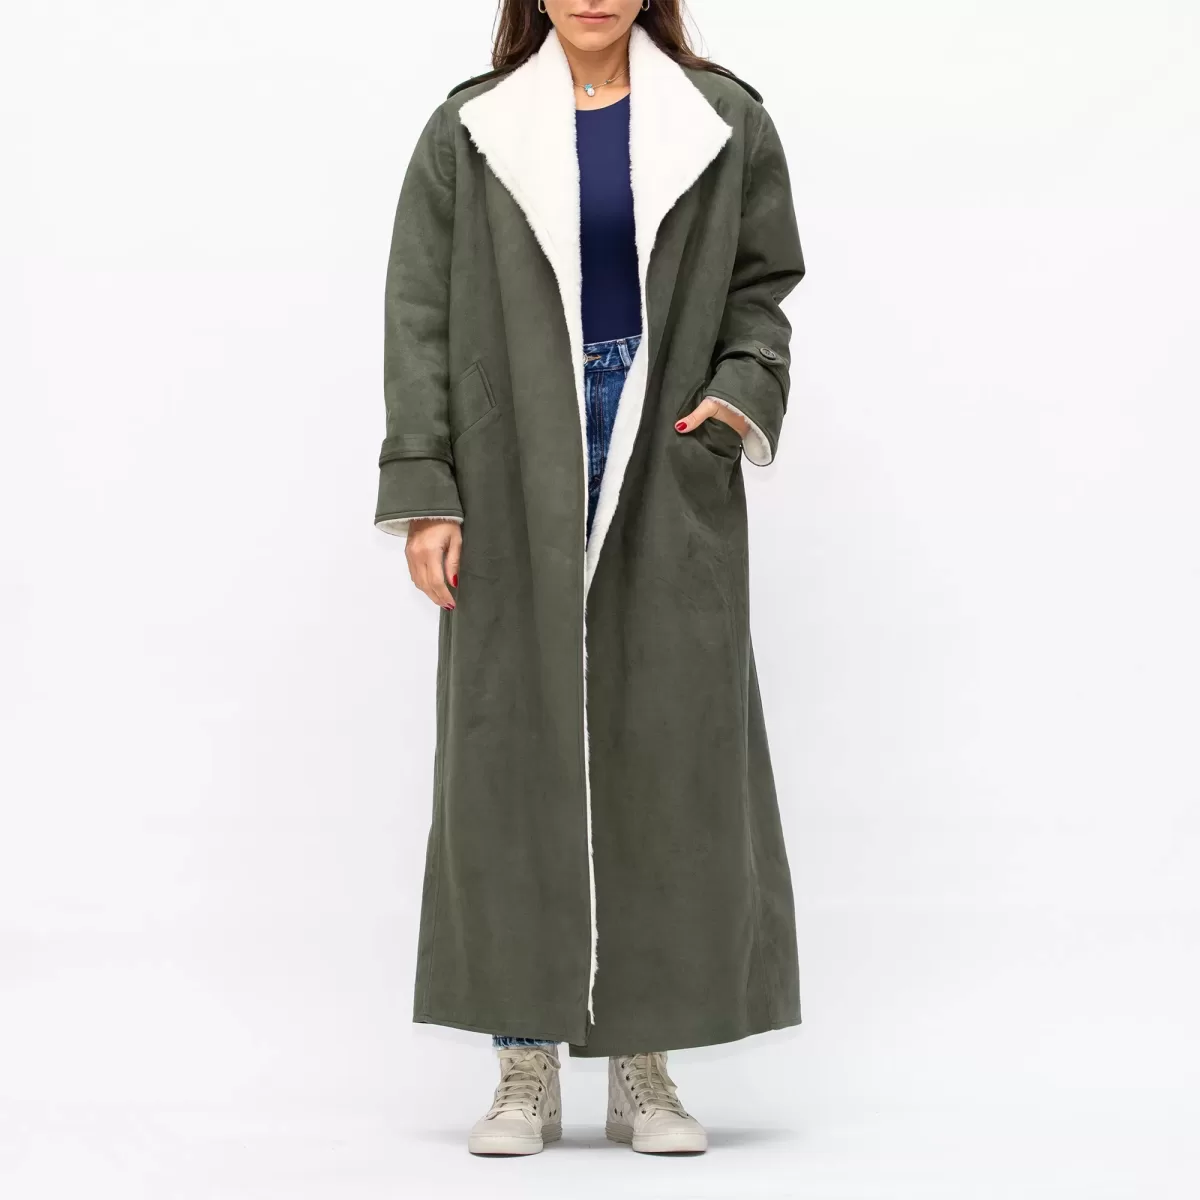 Basil Green Fur Coat Suede with Fur lining Belted Jacket